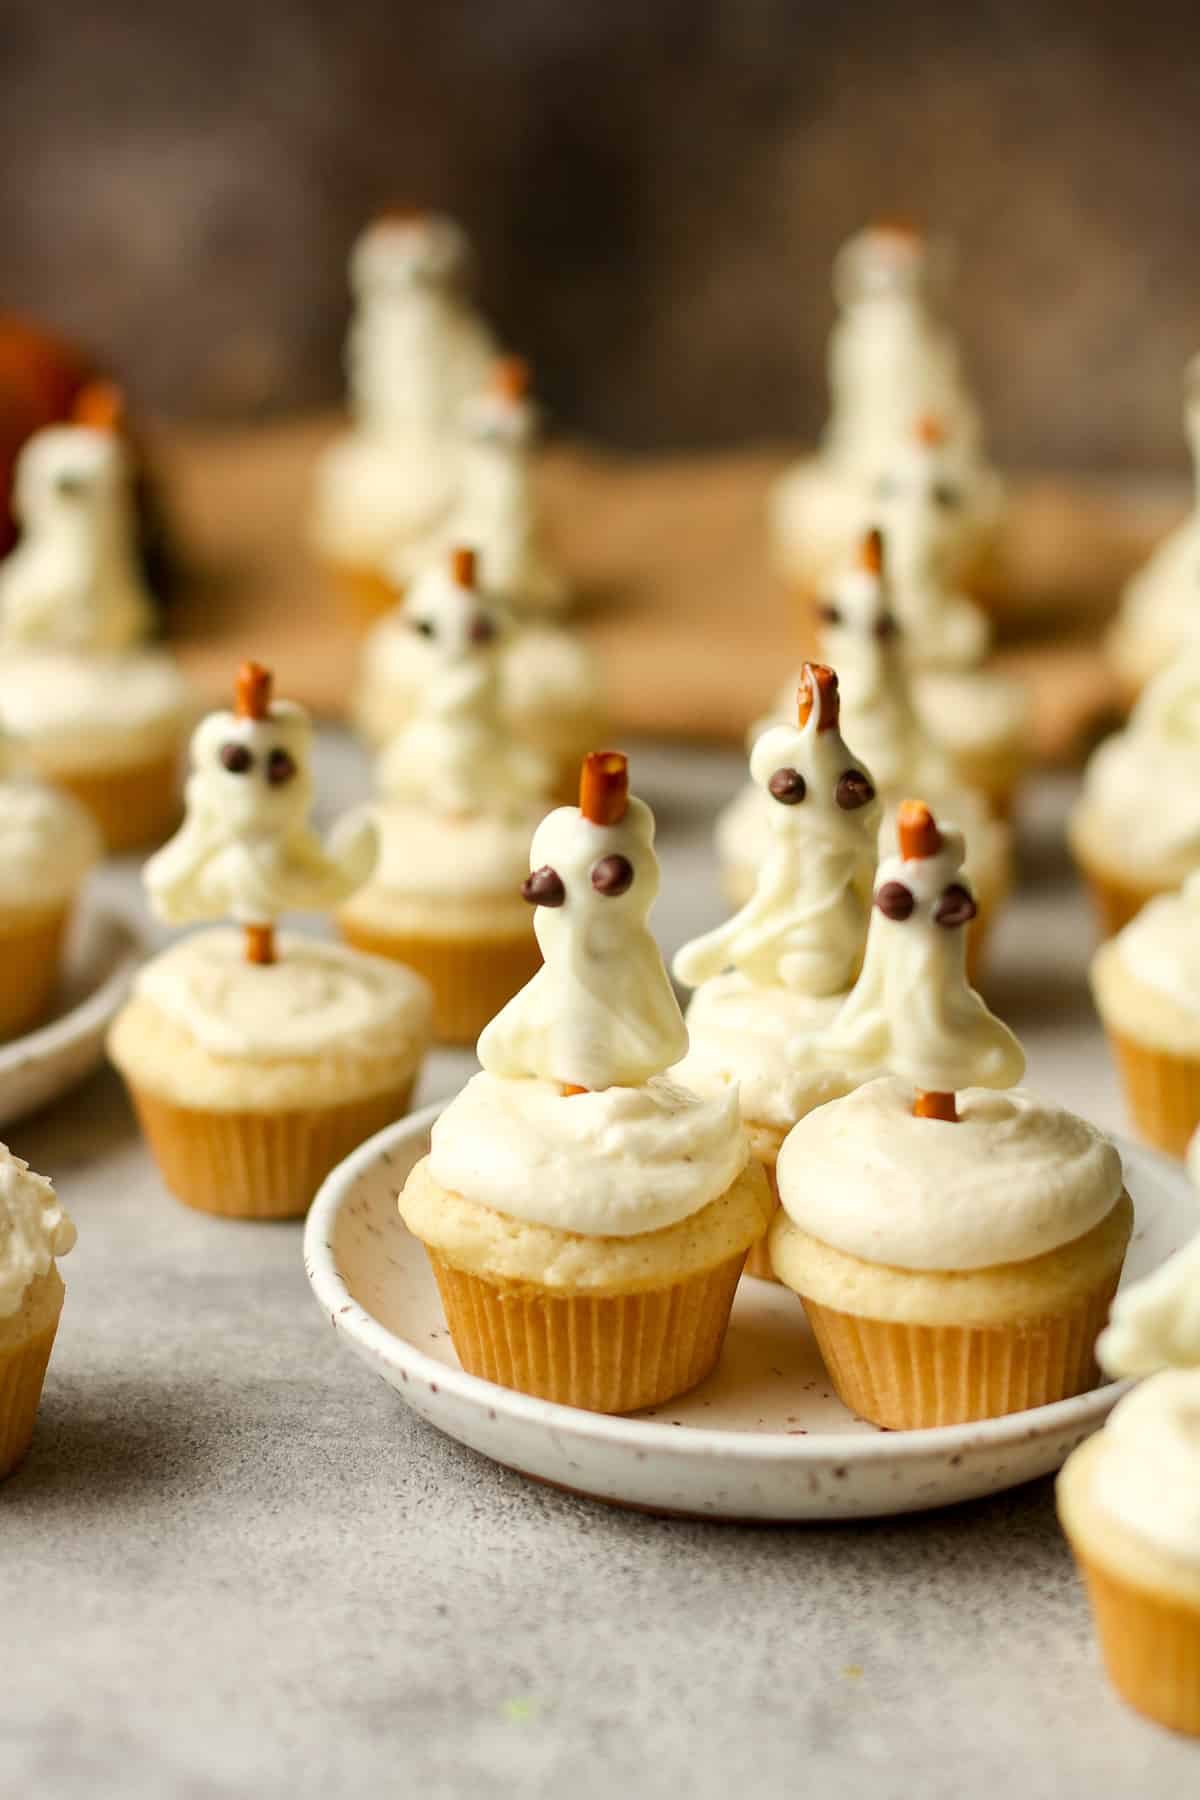 Side view of several vanilla bean cupcakes with buttercream frosting and pretzel ghosts.